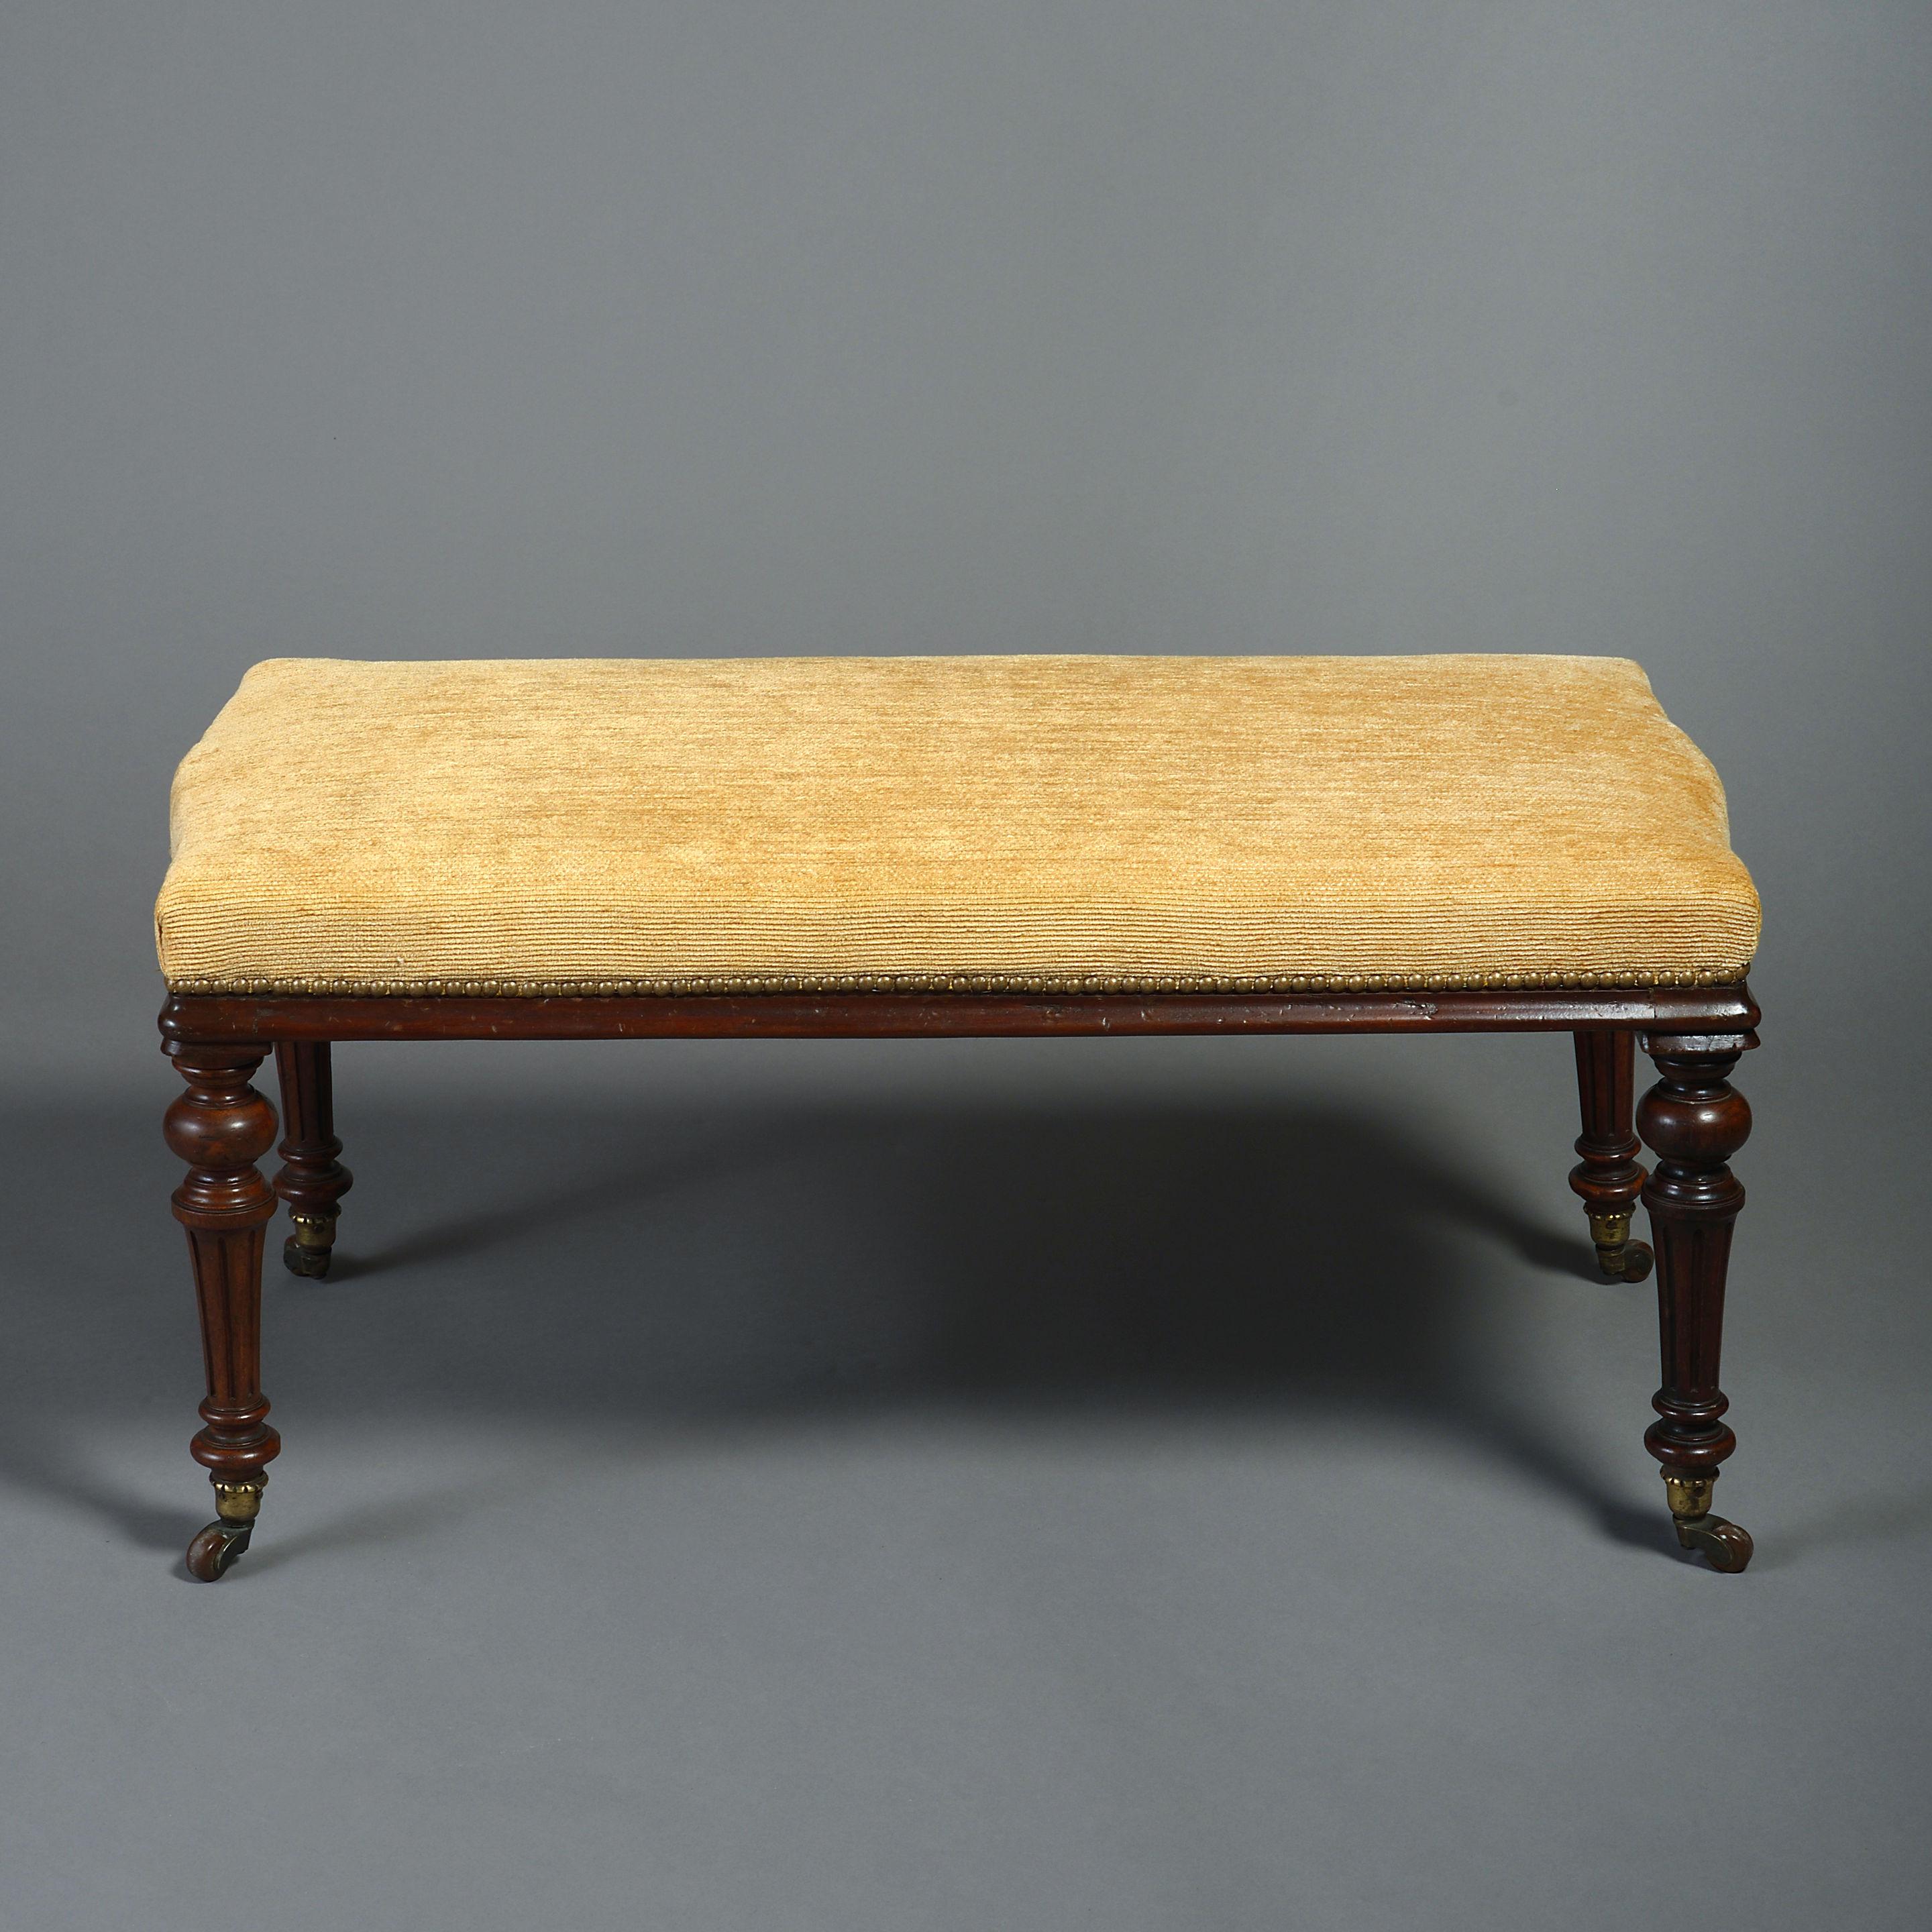 English Mid-19th Century Pair of Upholstered Long Stools